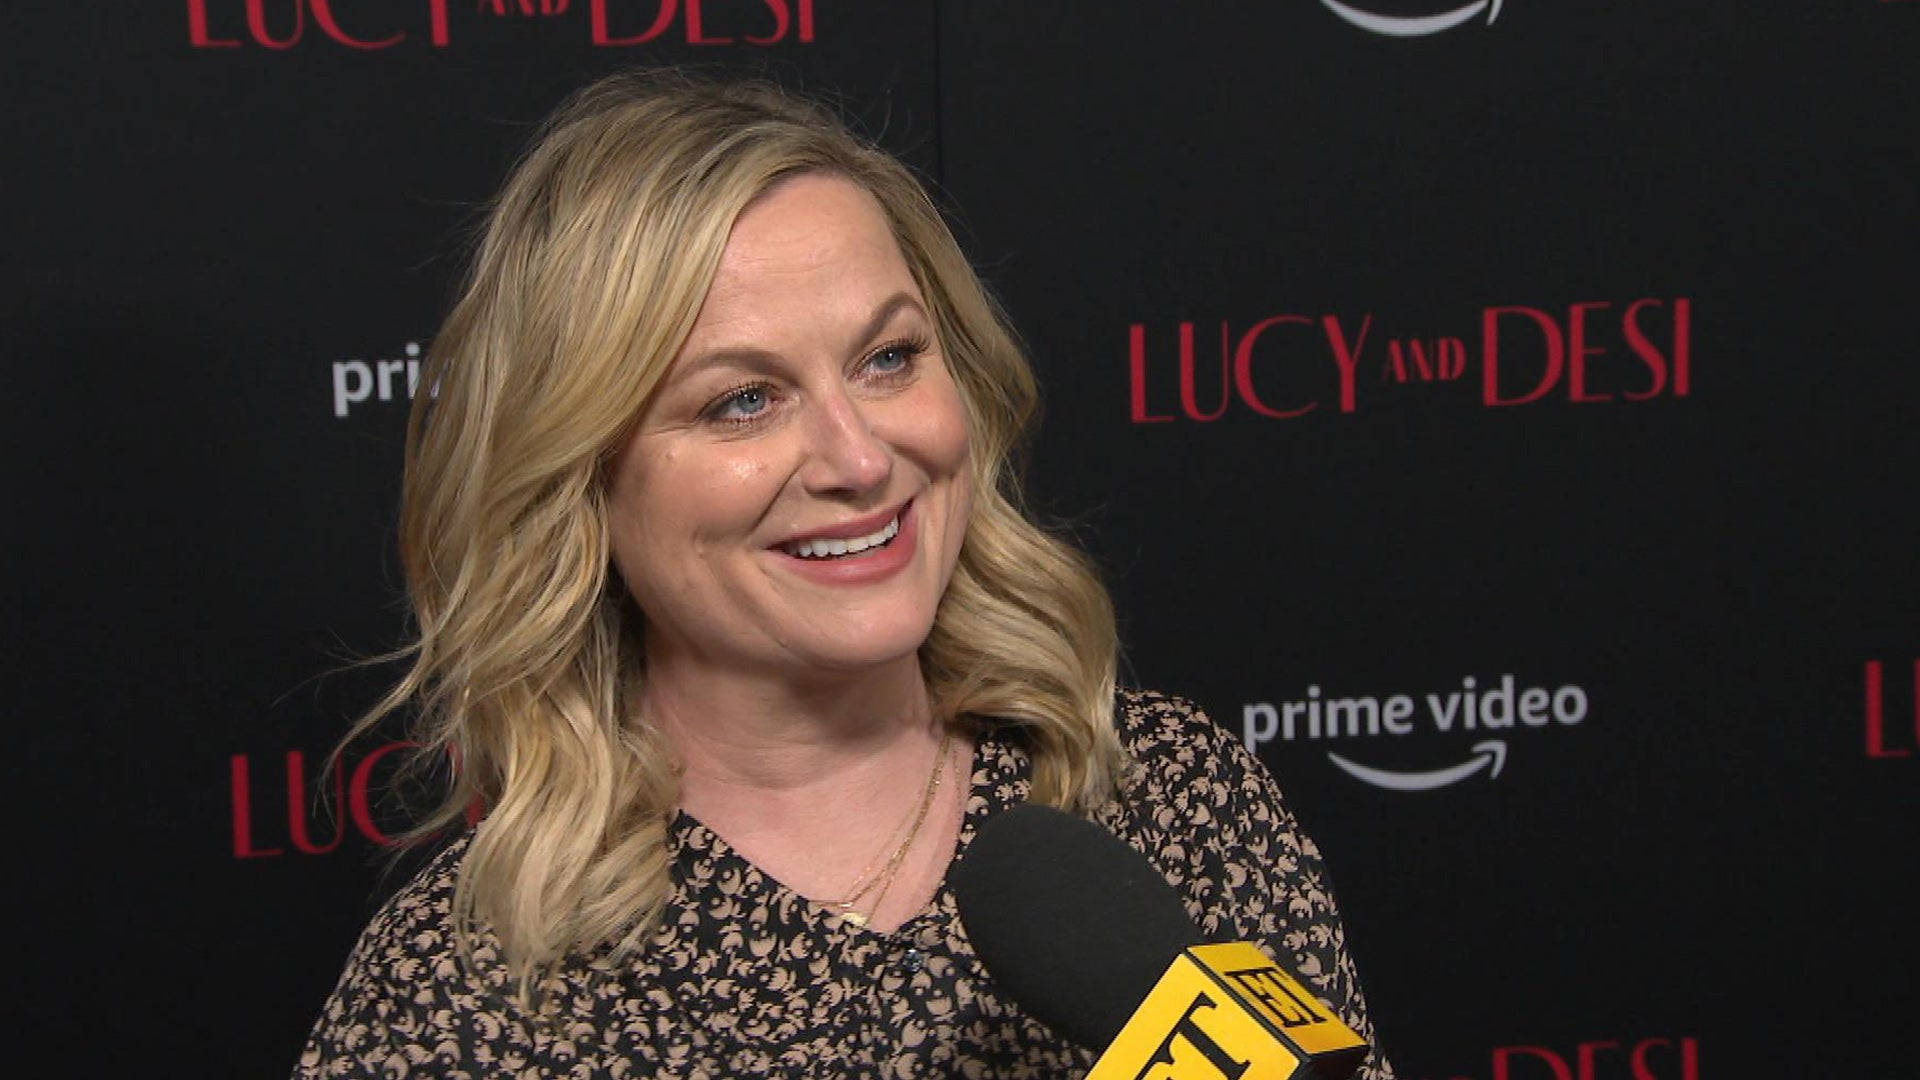 Amy Poehler Lucy And Desi Premiere Wallpaper